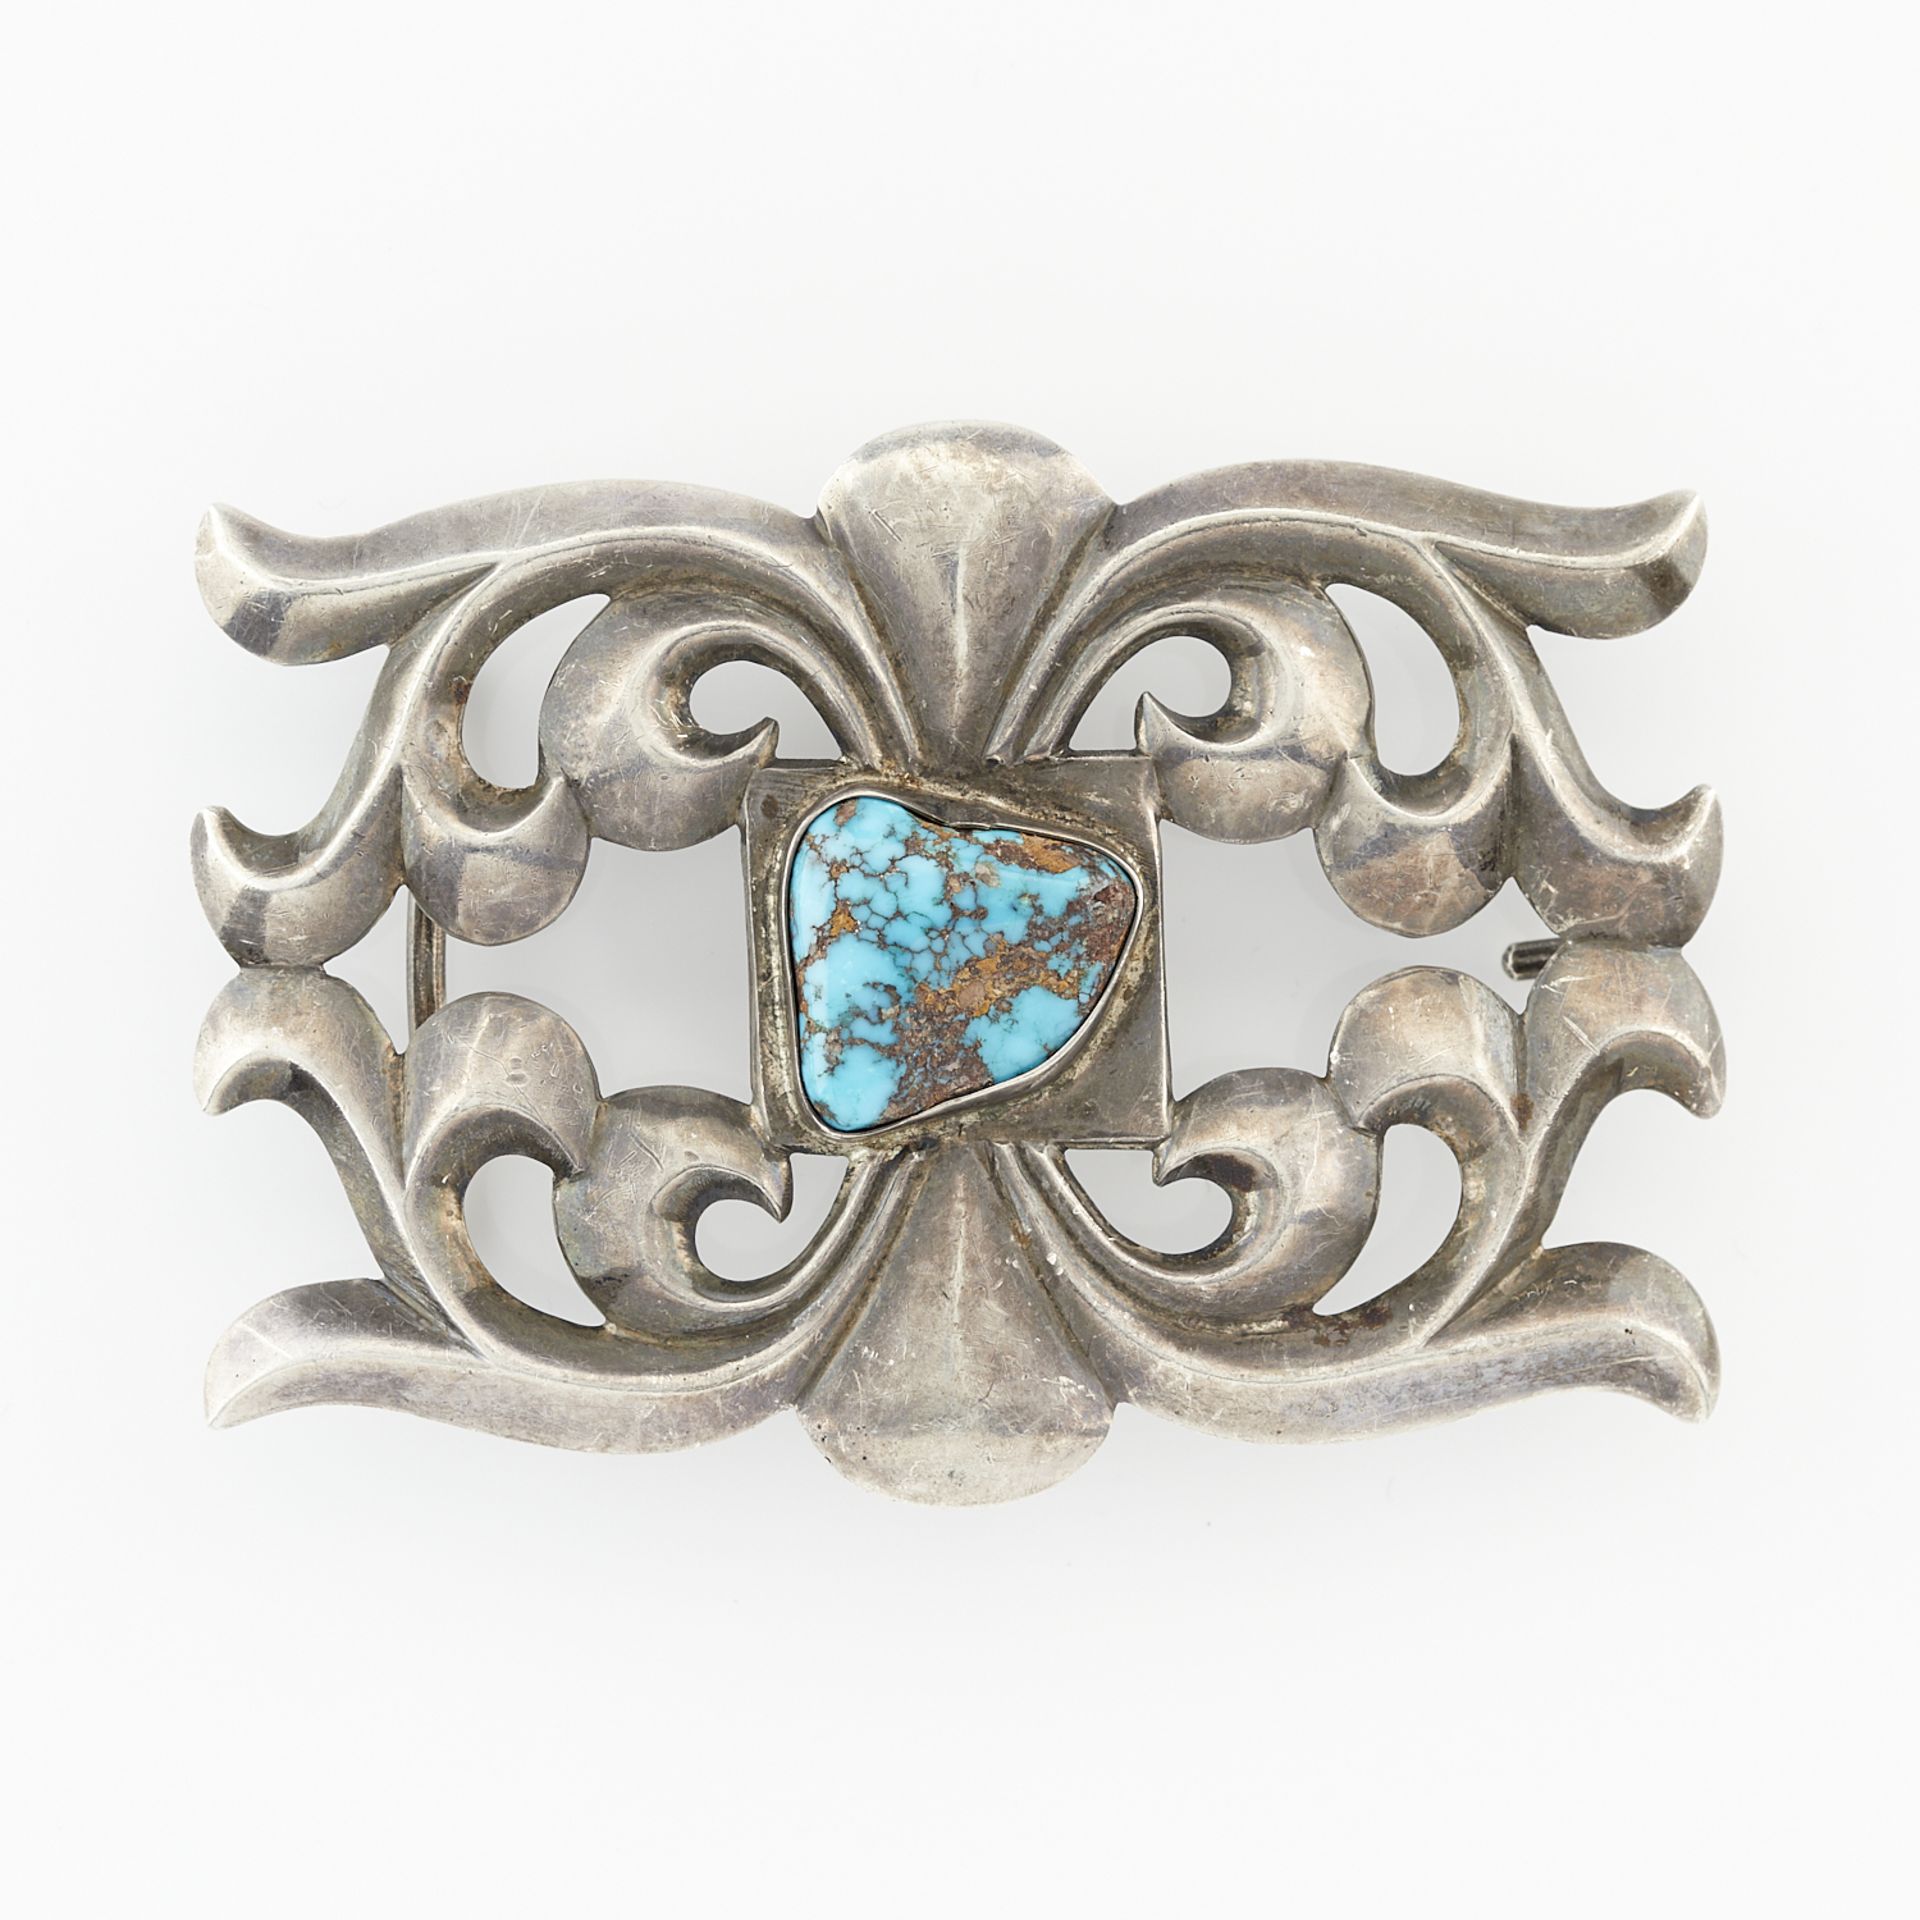 Large Sandcast Buckle w/ Turquoise